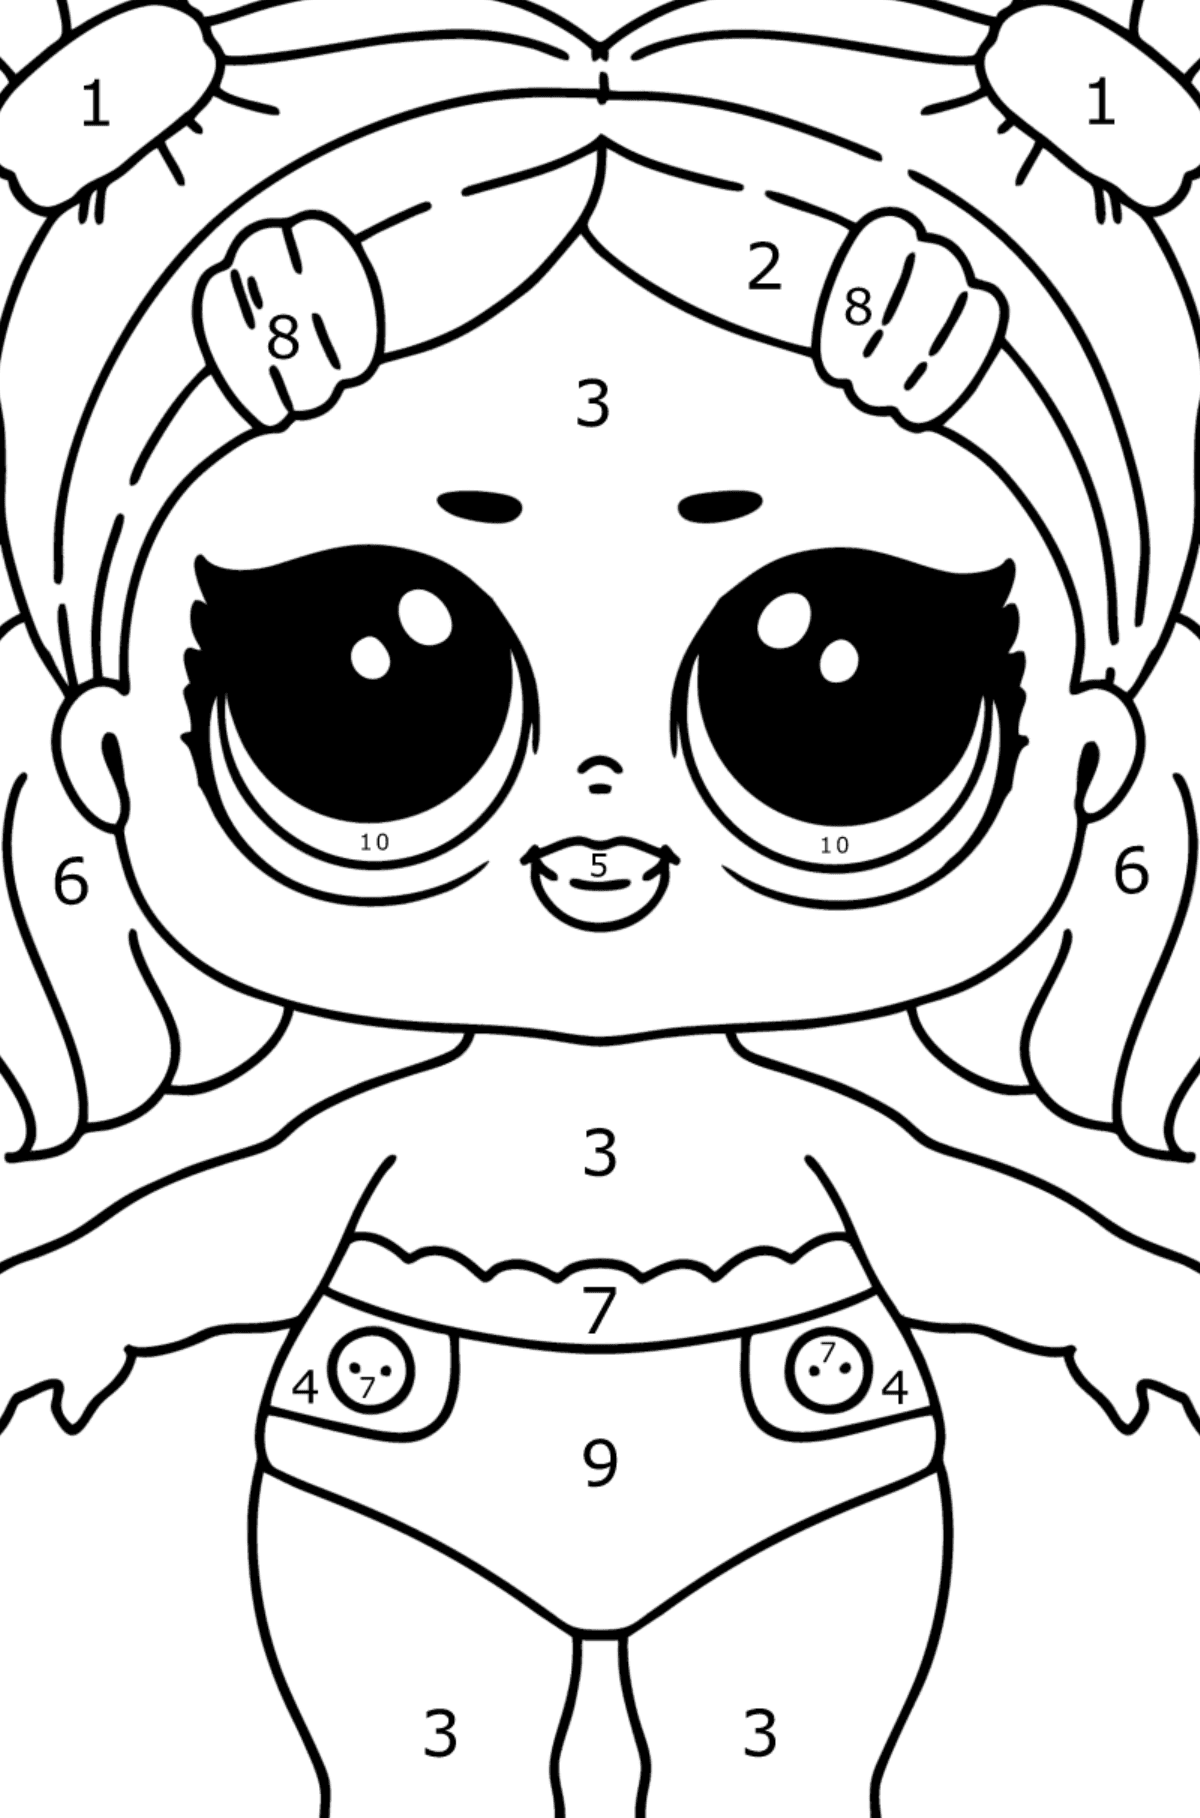 Coloring page LOL LIL Dusk - Coloring by Numbers for Kids